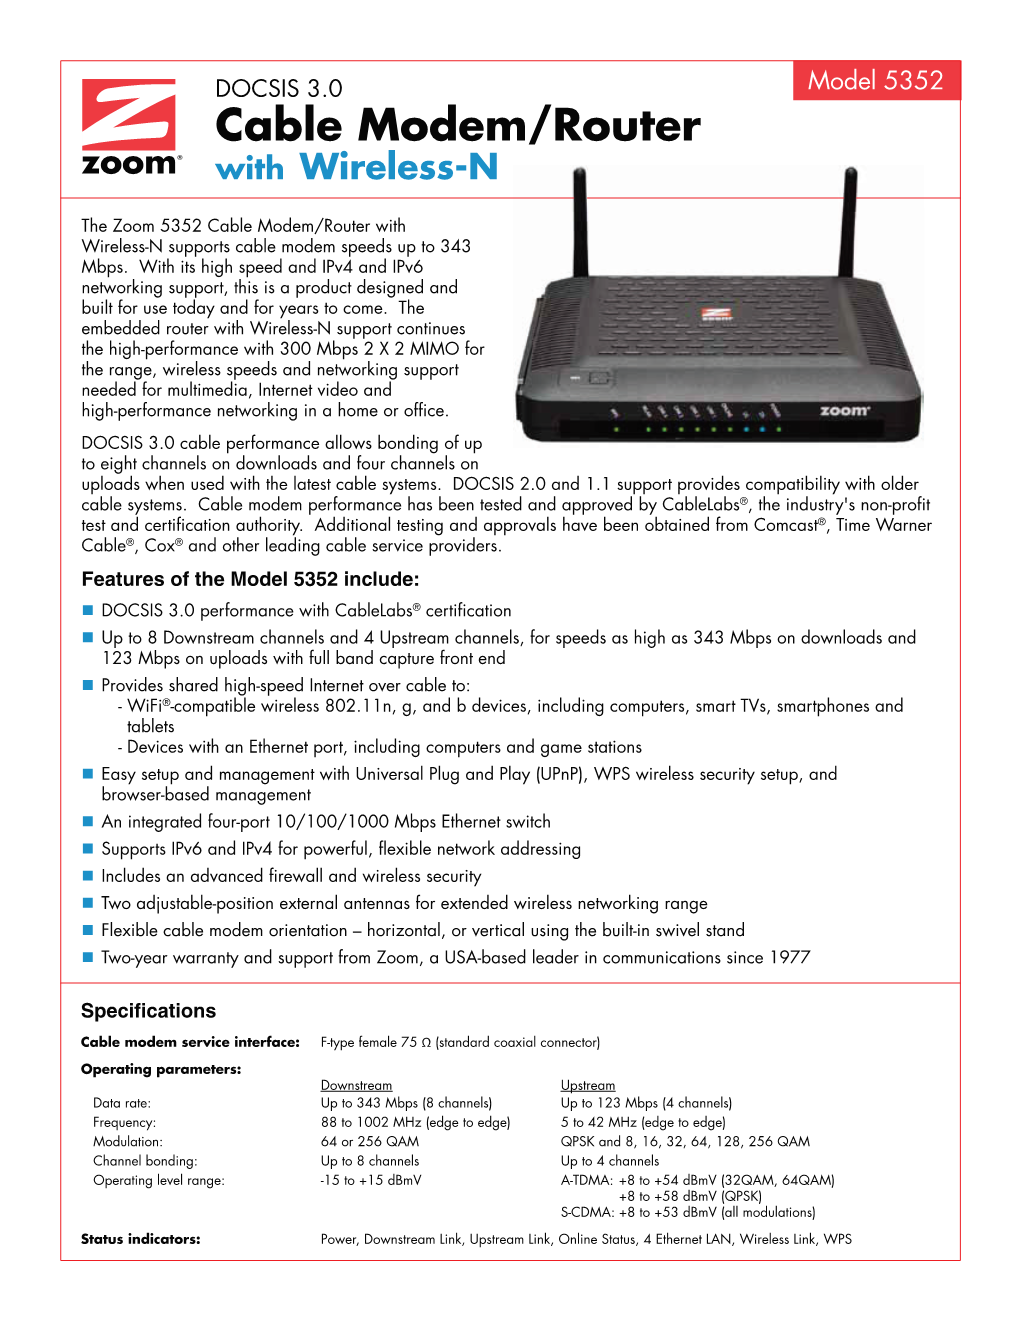 Cable Modem/Router with Wireless-N